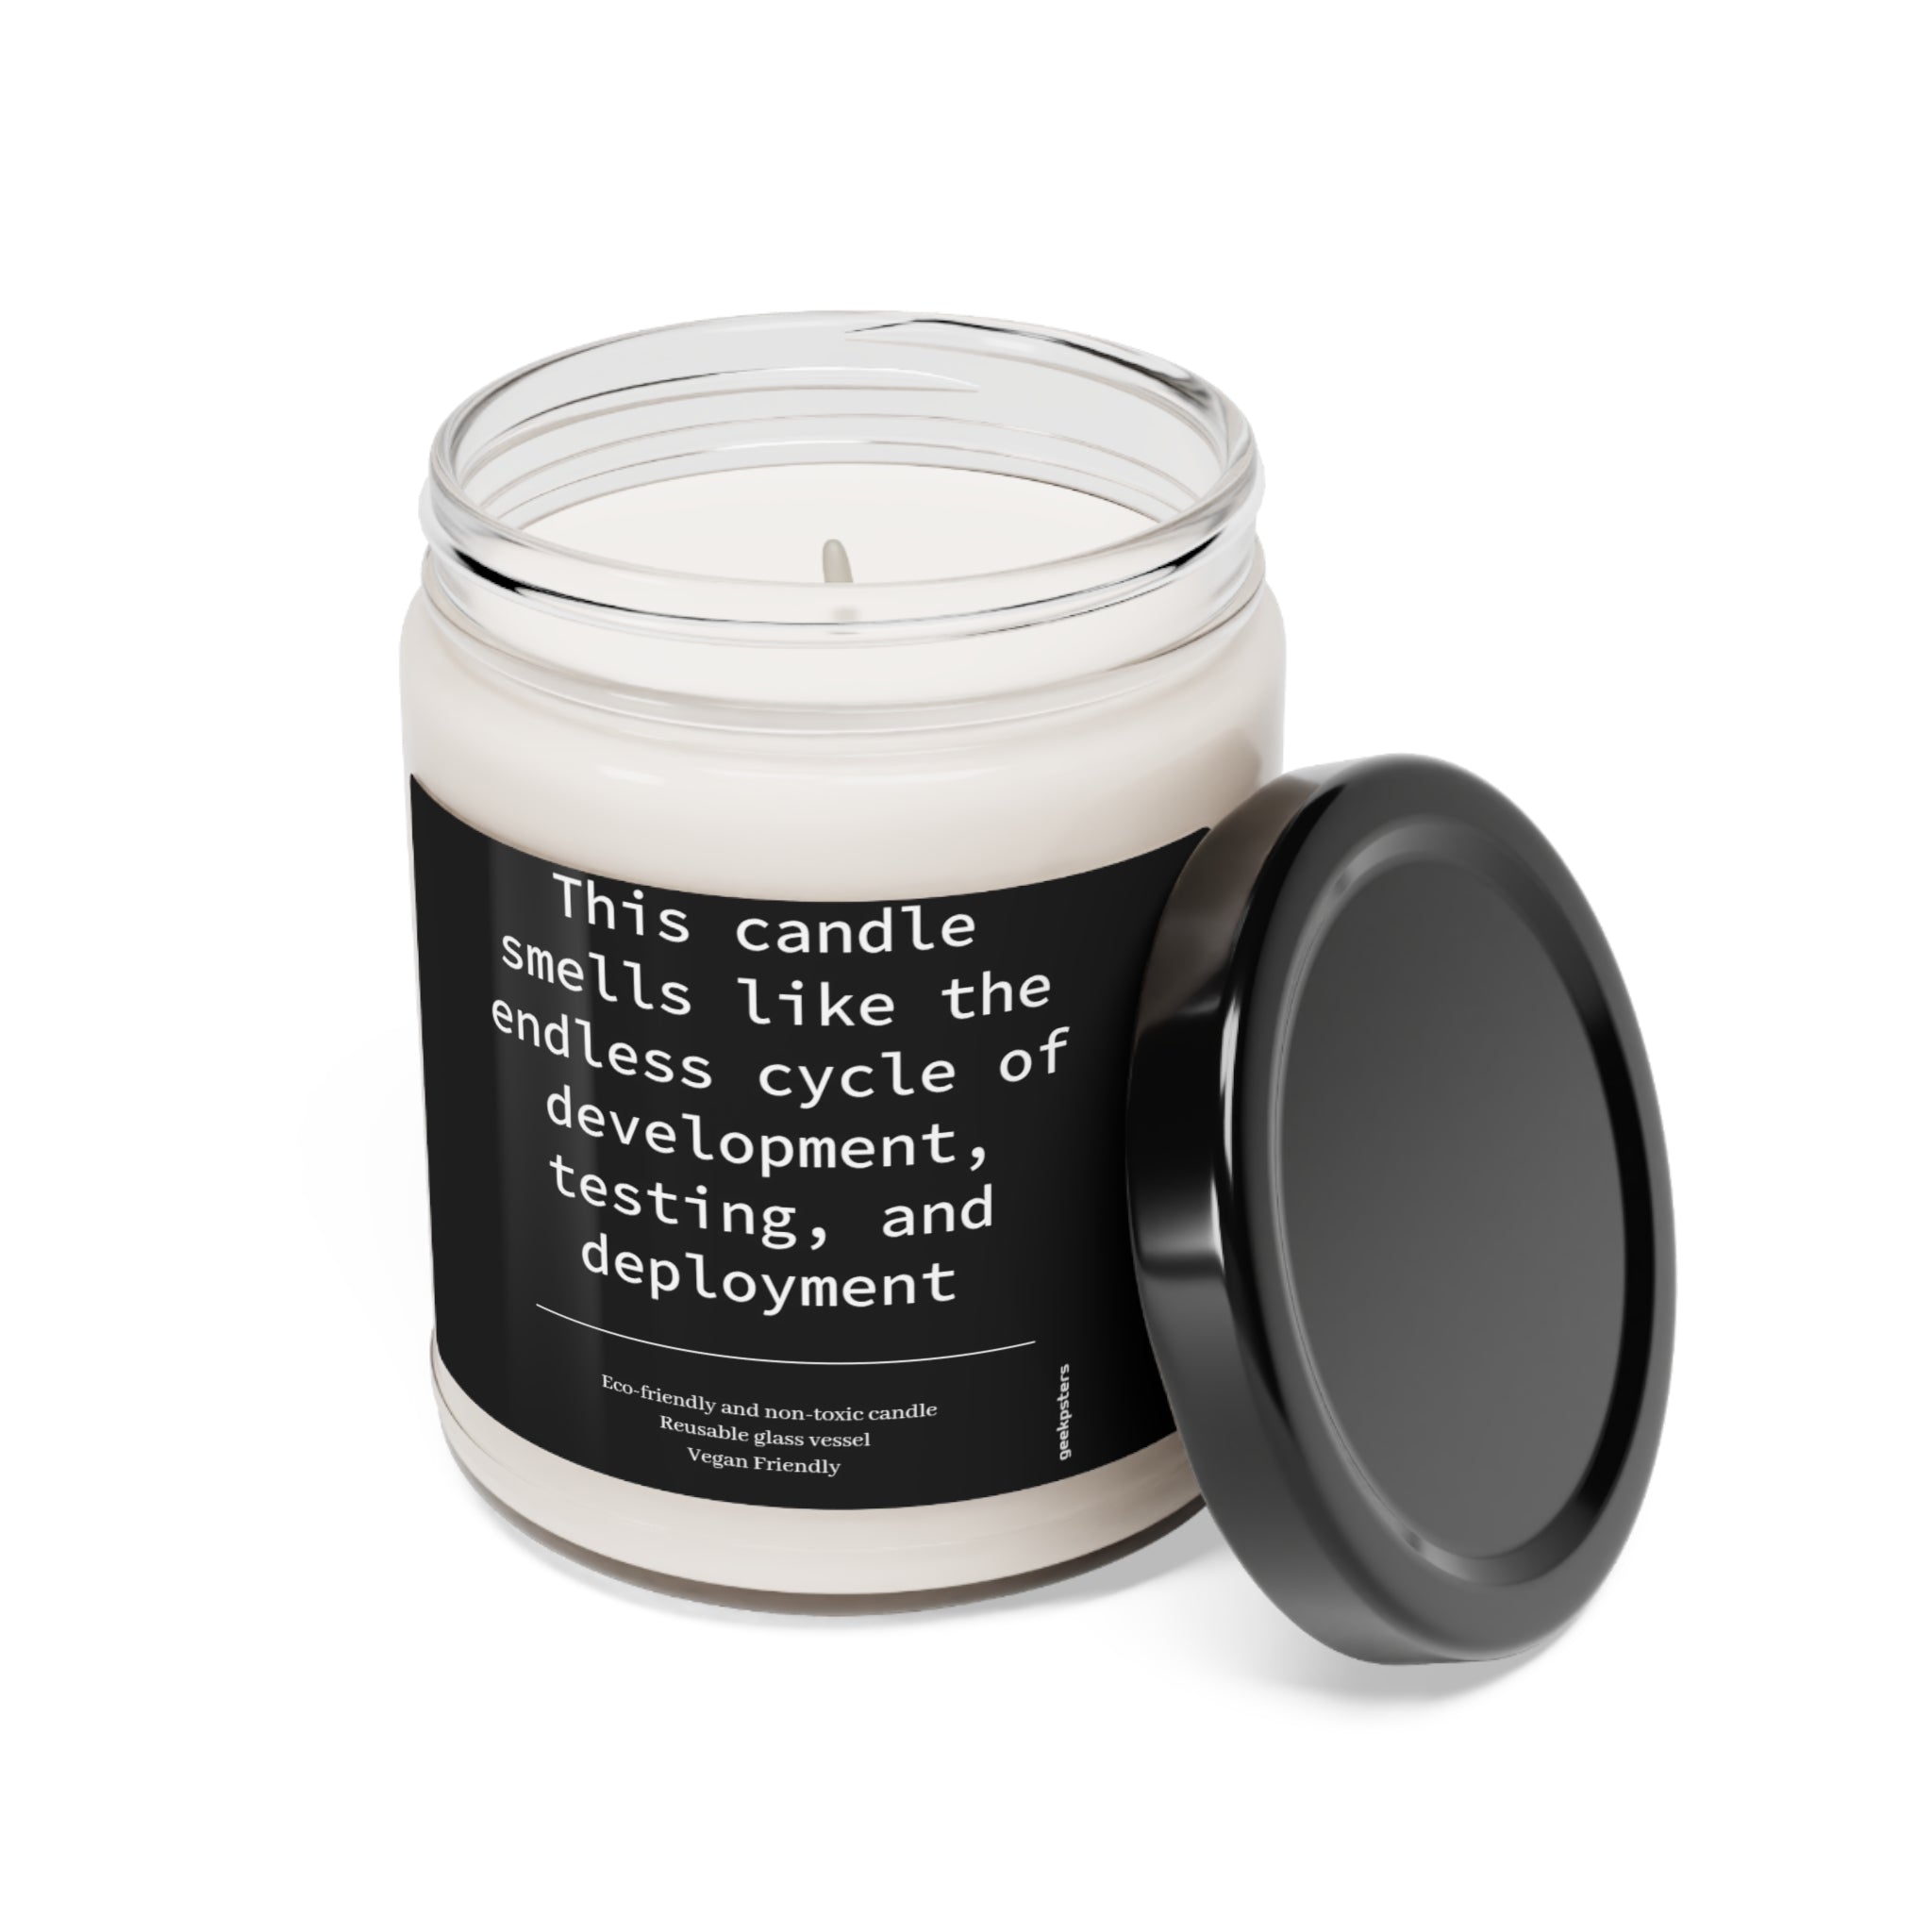 A "This Candle Smells Like the Endless Cycle of Development, Testing and Deployment" scented soy candle in a glass jar with a label stating "this candle smells like the endless cycle of development, testing, and deployment," alongside an open black lid.